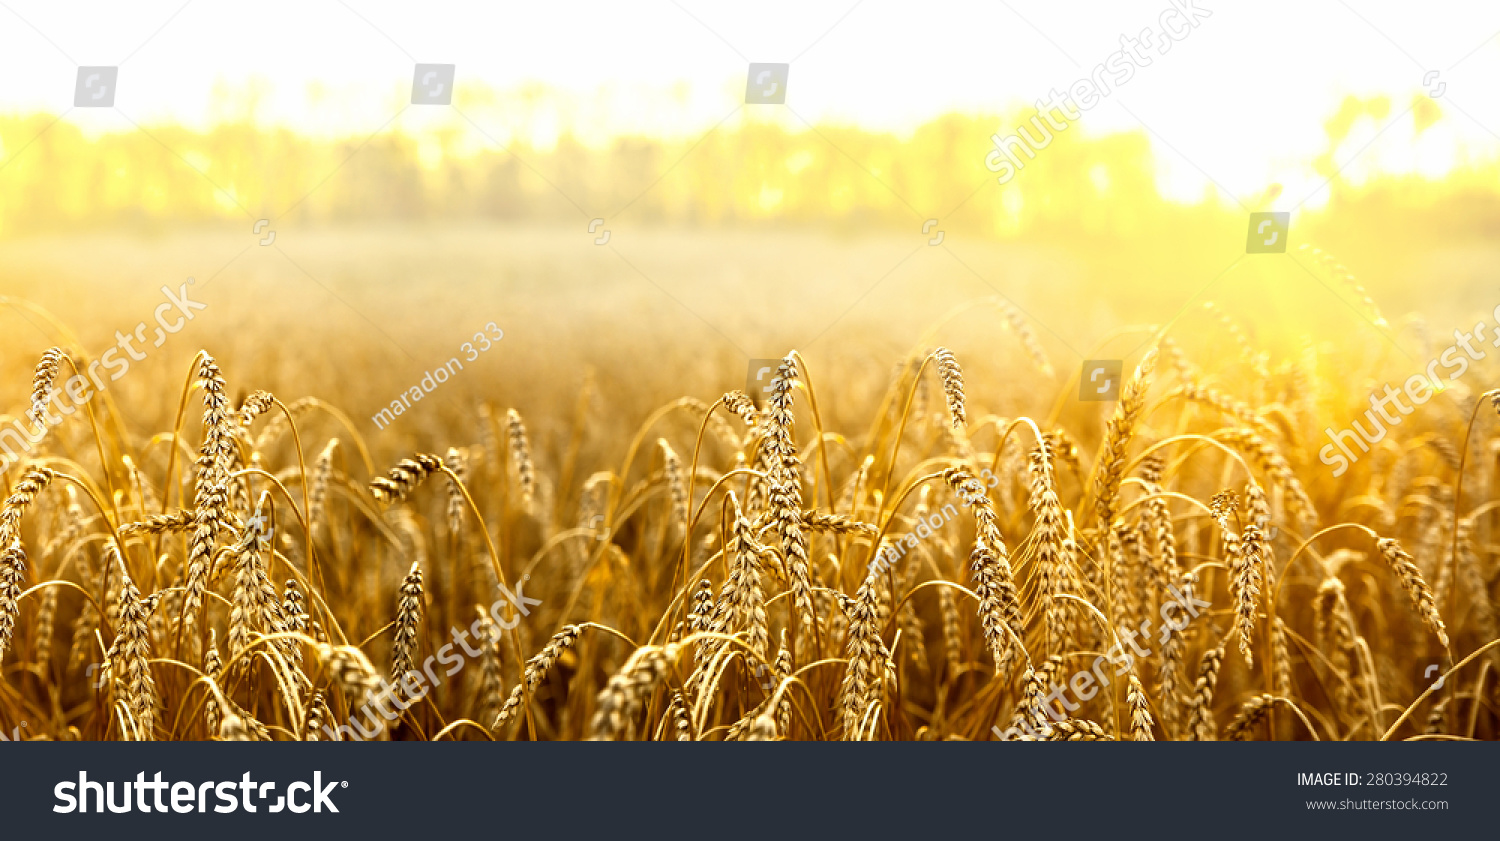 backdrop of ripening ears of yellow wheat field on the sunset cloudy orange sky background Copy space of the setting sun rays on horizon in rural meadow Close up nature photo Idea of a rich harvest #280394822